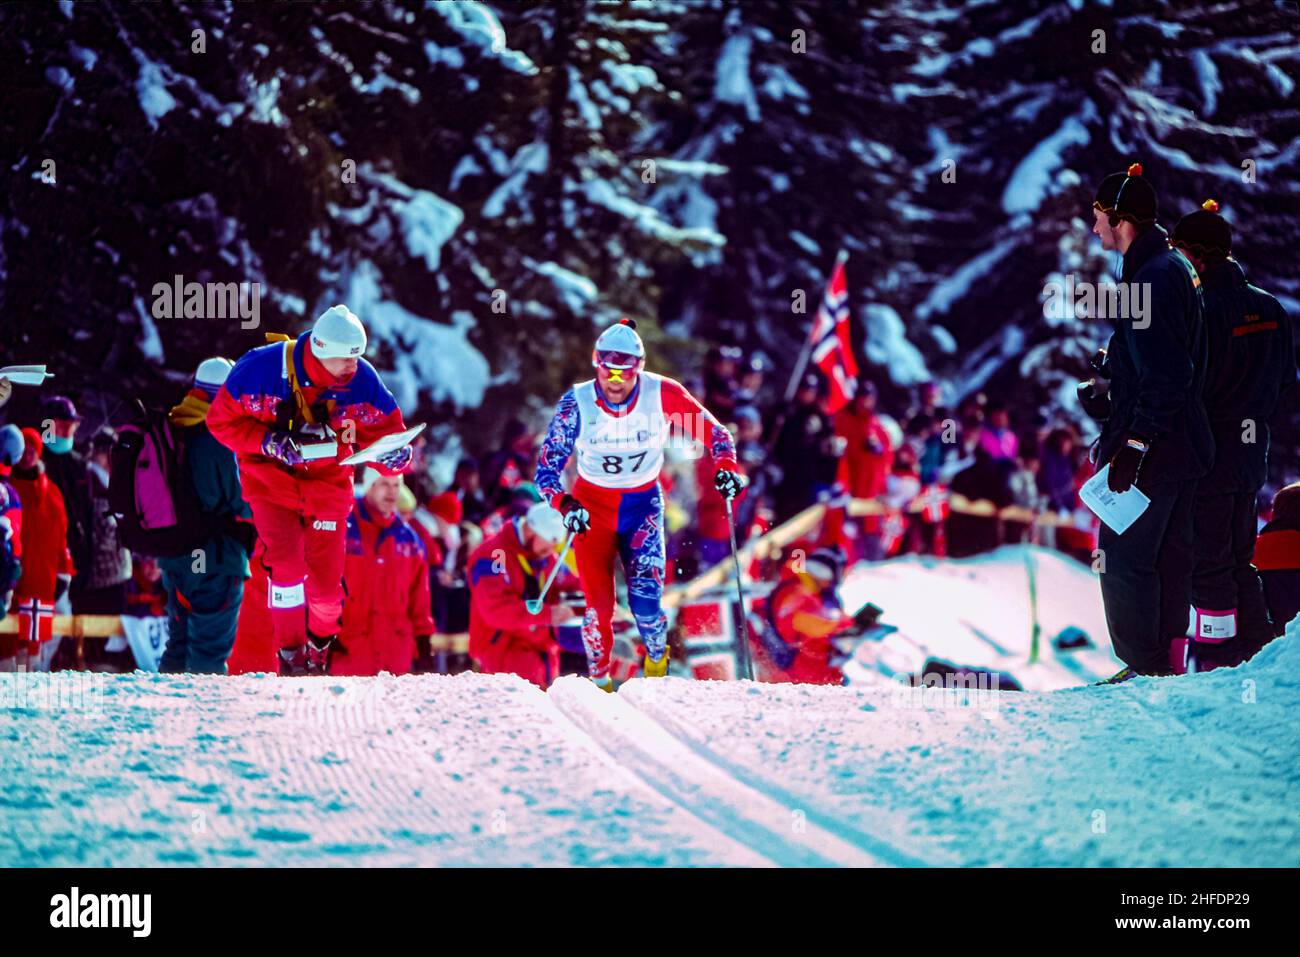 Vegard Ulvang (NOR) wins the gold medal in the men's 10km cross country skiing at the 1994 Olympic Winter Games. Stock Photo